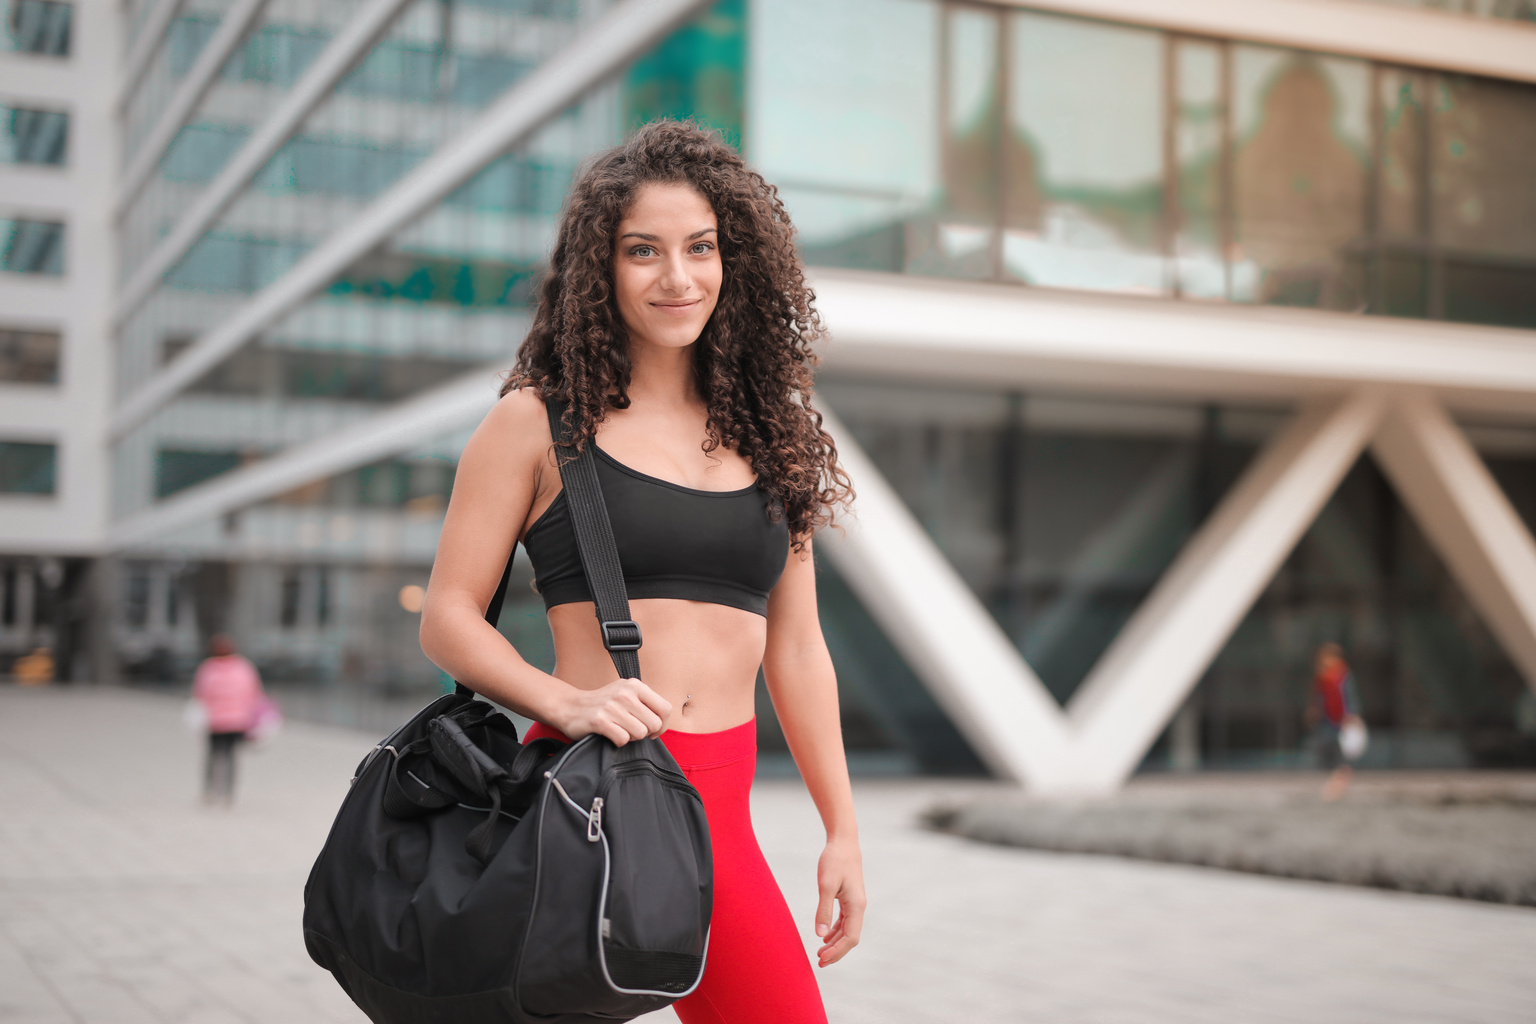 Selective Focus Photo of Smiling Woman In Active Wear Carrying Gym Bag